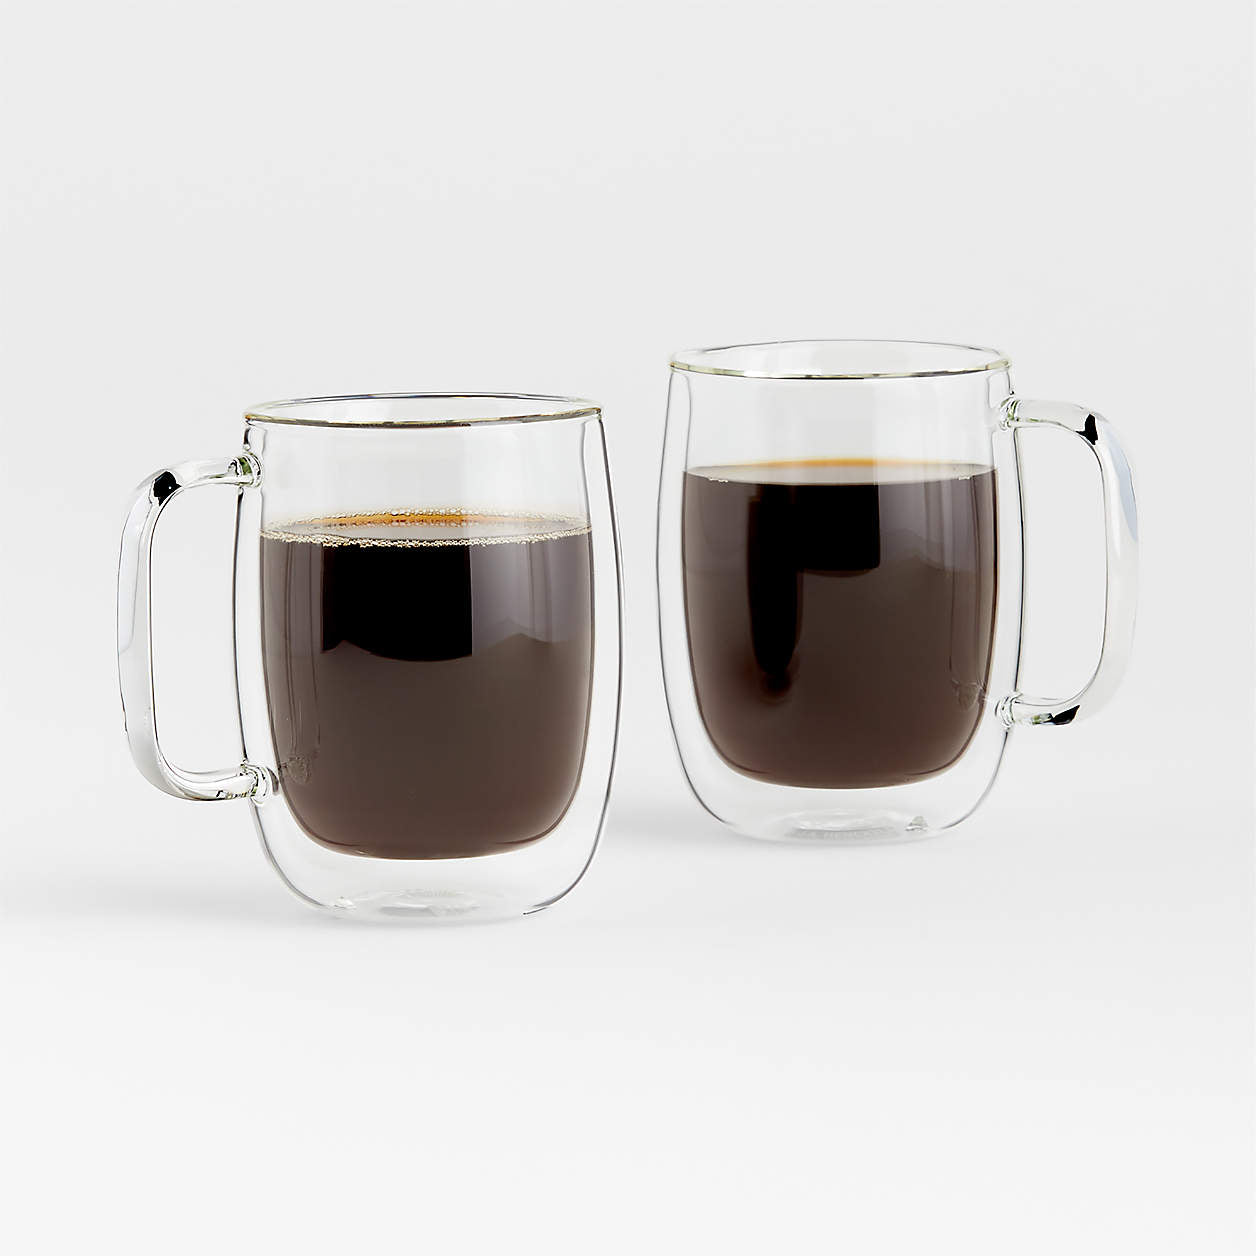 2 sorrento glass coffee mugs filled with coffee on a white background.